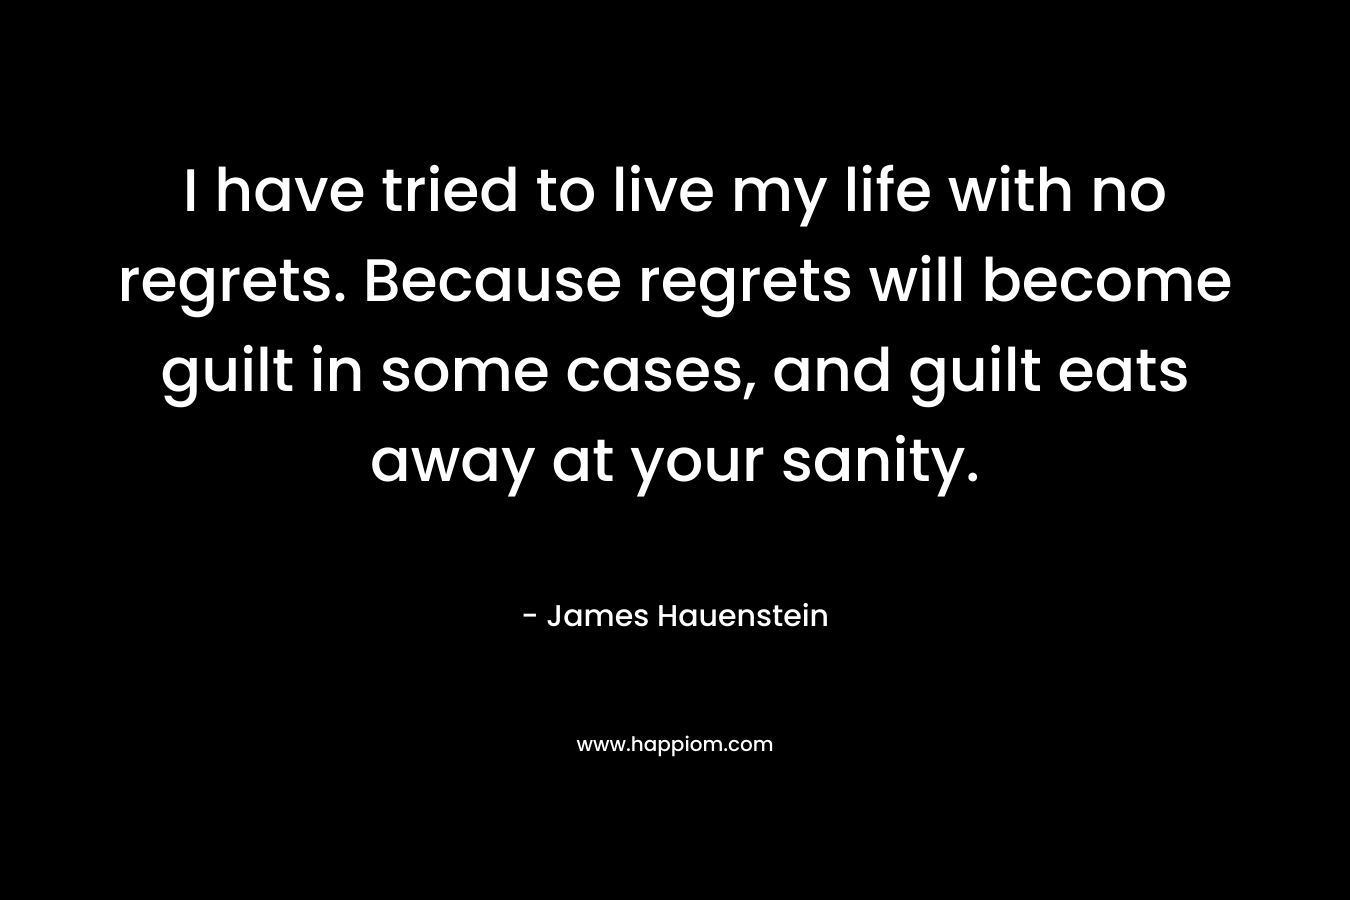 I have tried to live my life with no regrets. Because regrets will become guilt in some cases, and guilt eats away at your sanity.